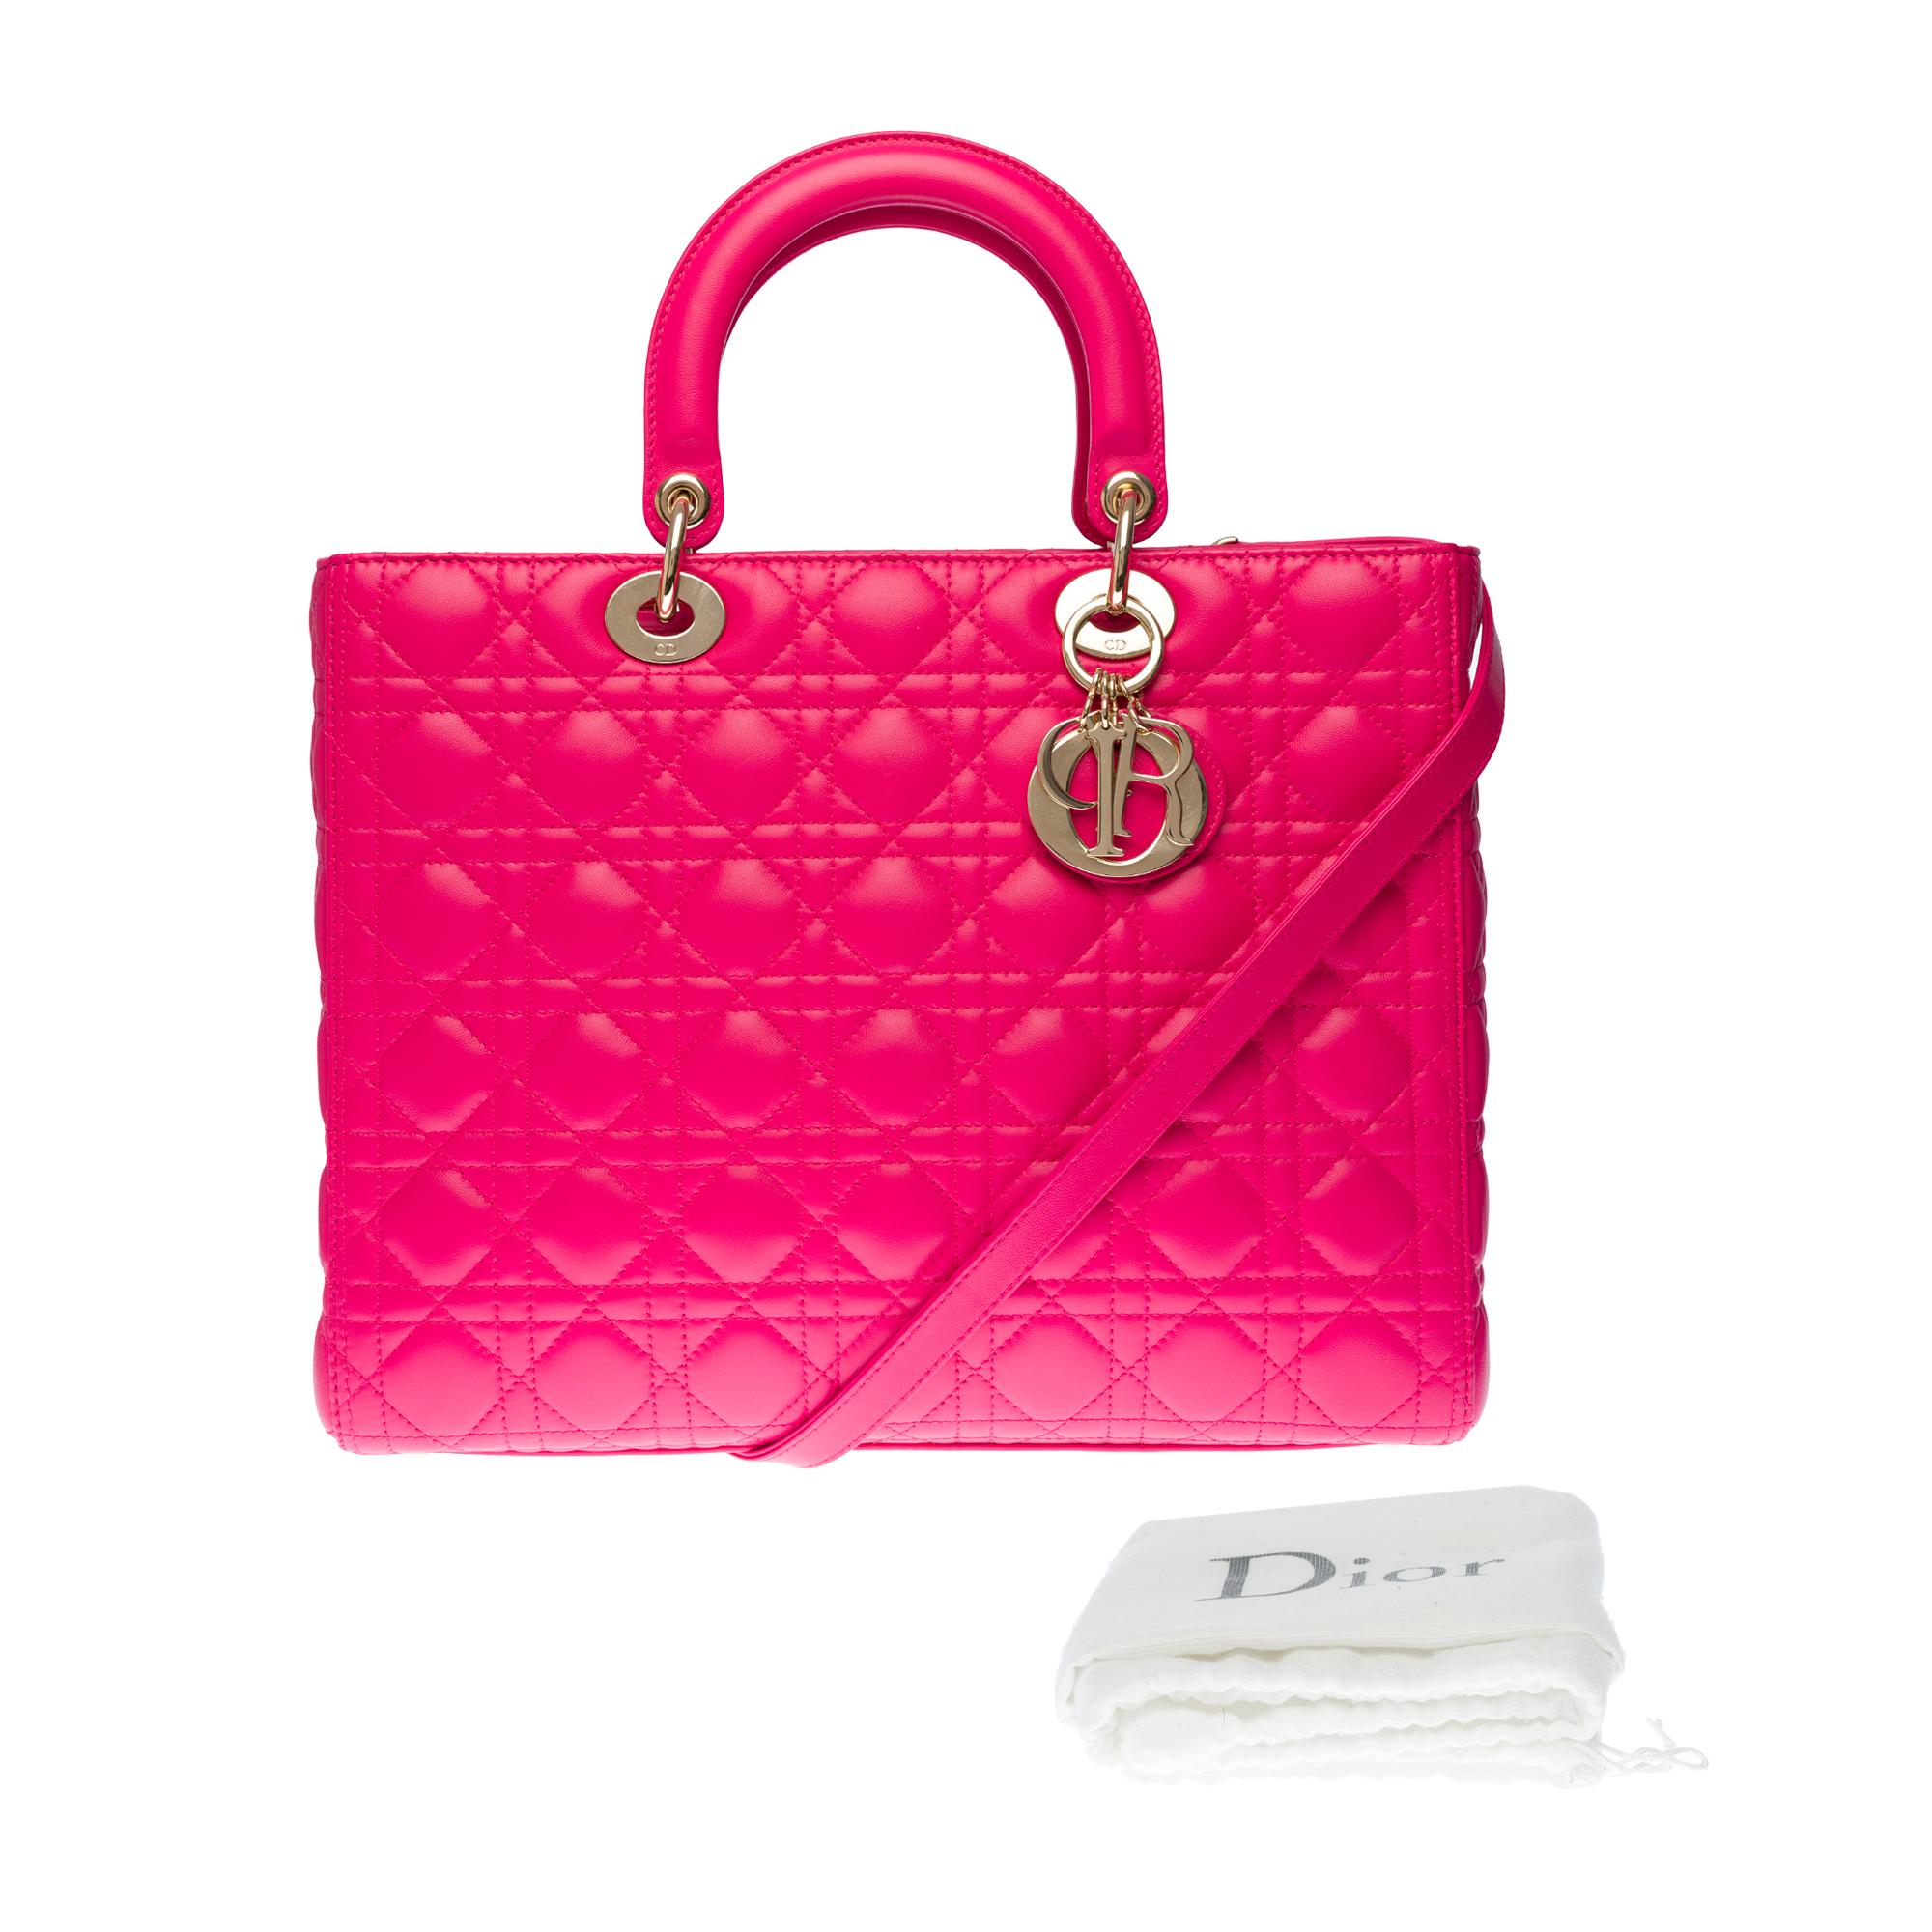 Lady Dior GM ( large size) shoulder bag with strap in Pink cannage leather, SHW 6